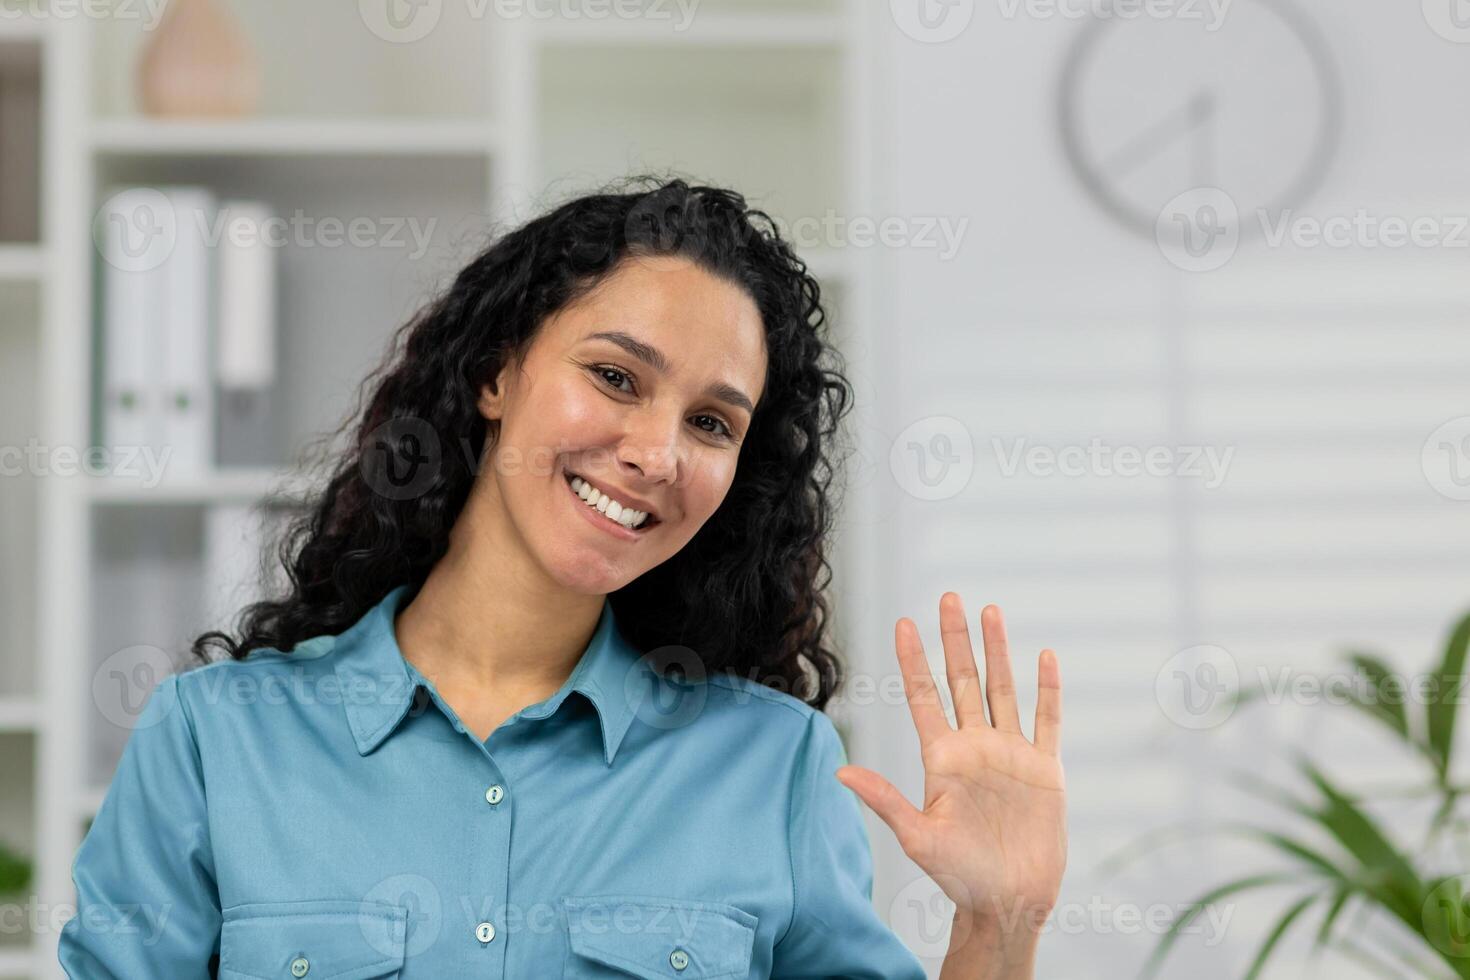 Smiling woman in a casual shirt waving hello during a call, providing an engaging webcam view POV in a home setting. photo